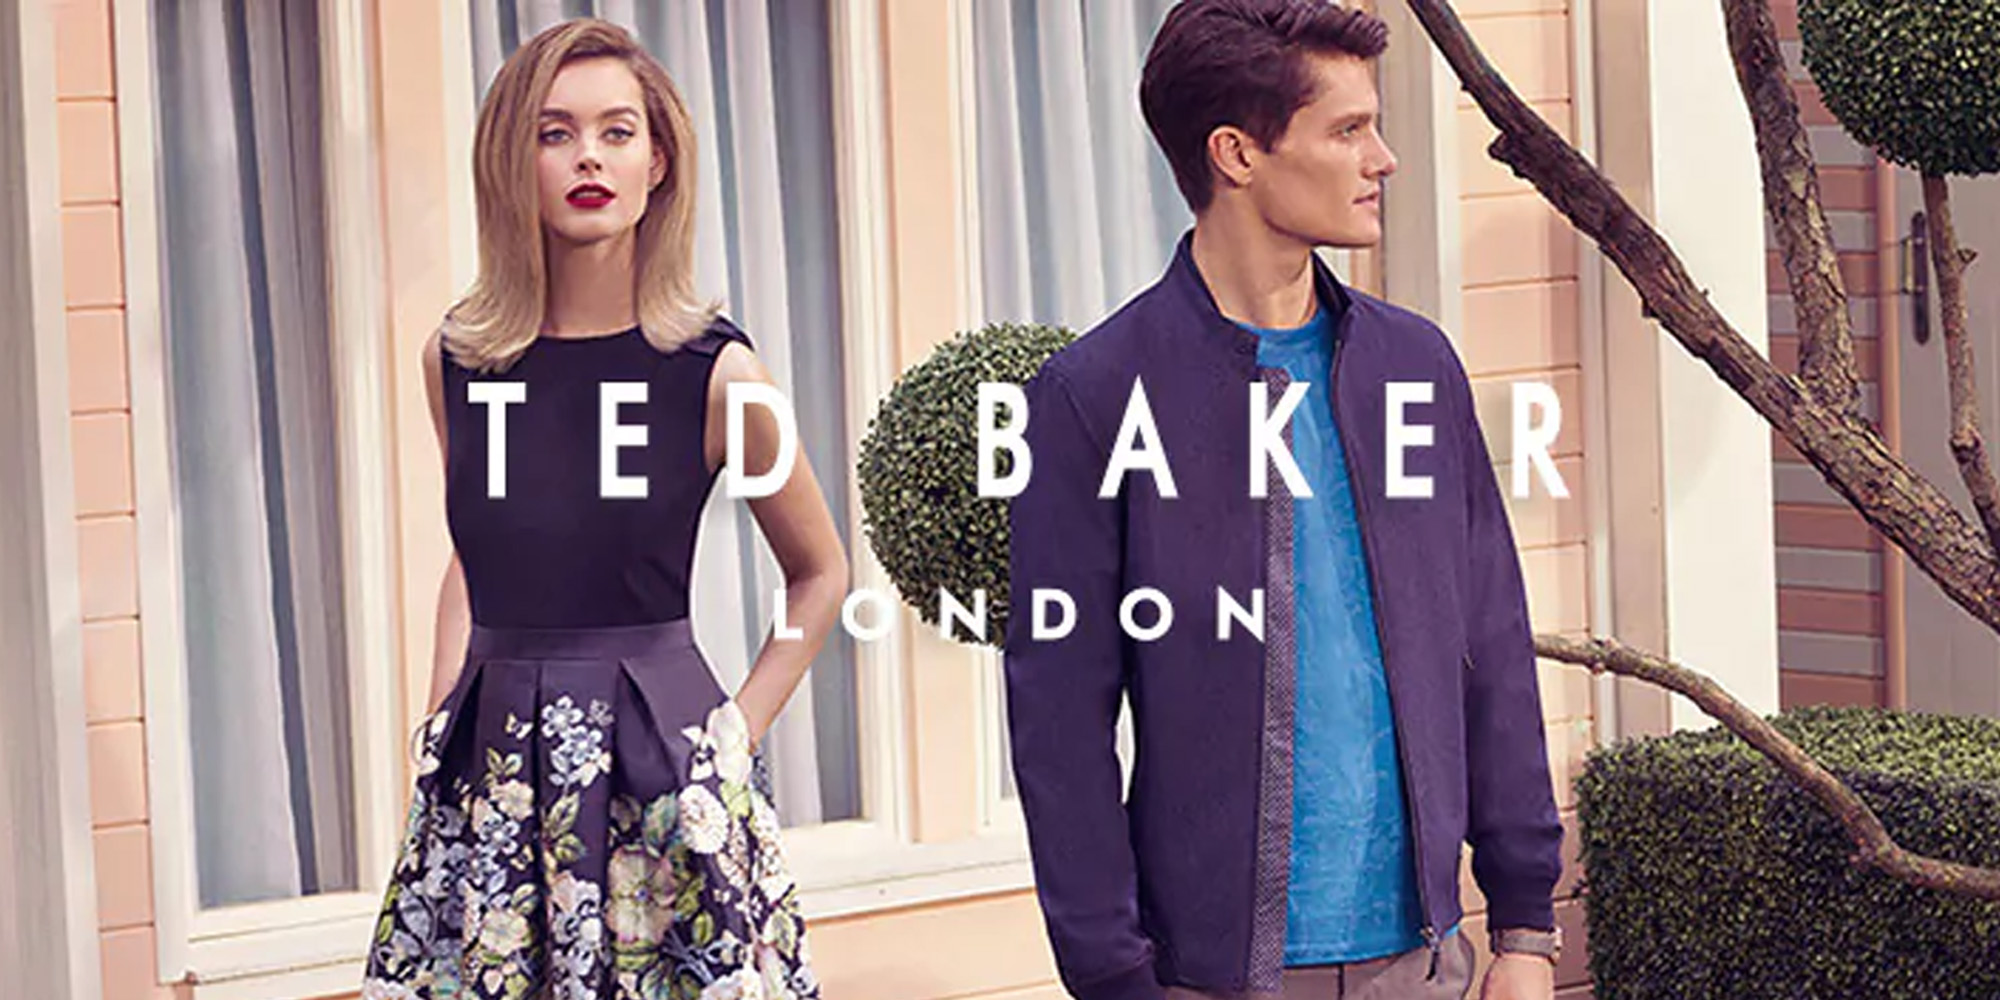 Ted Baker has shirts, dresses, pants and accessories up to 50% off